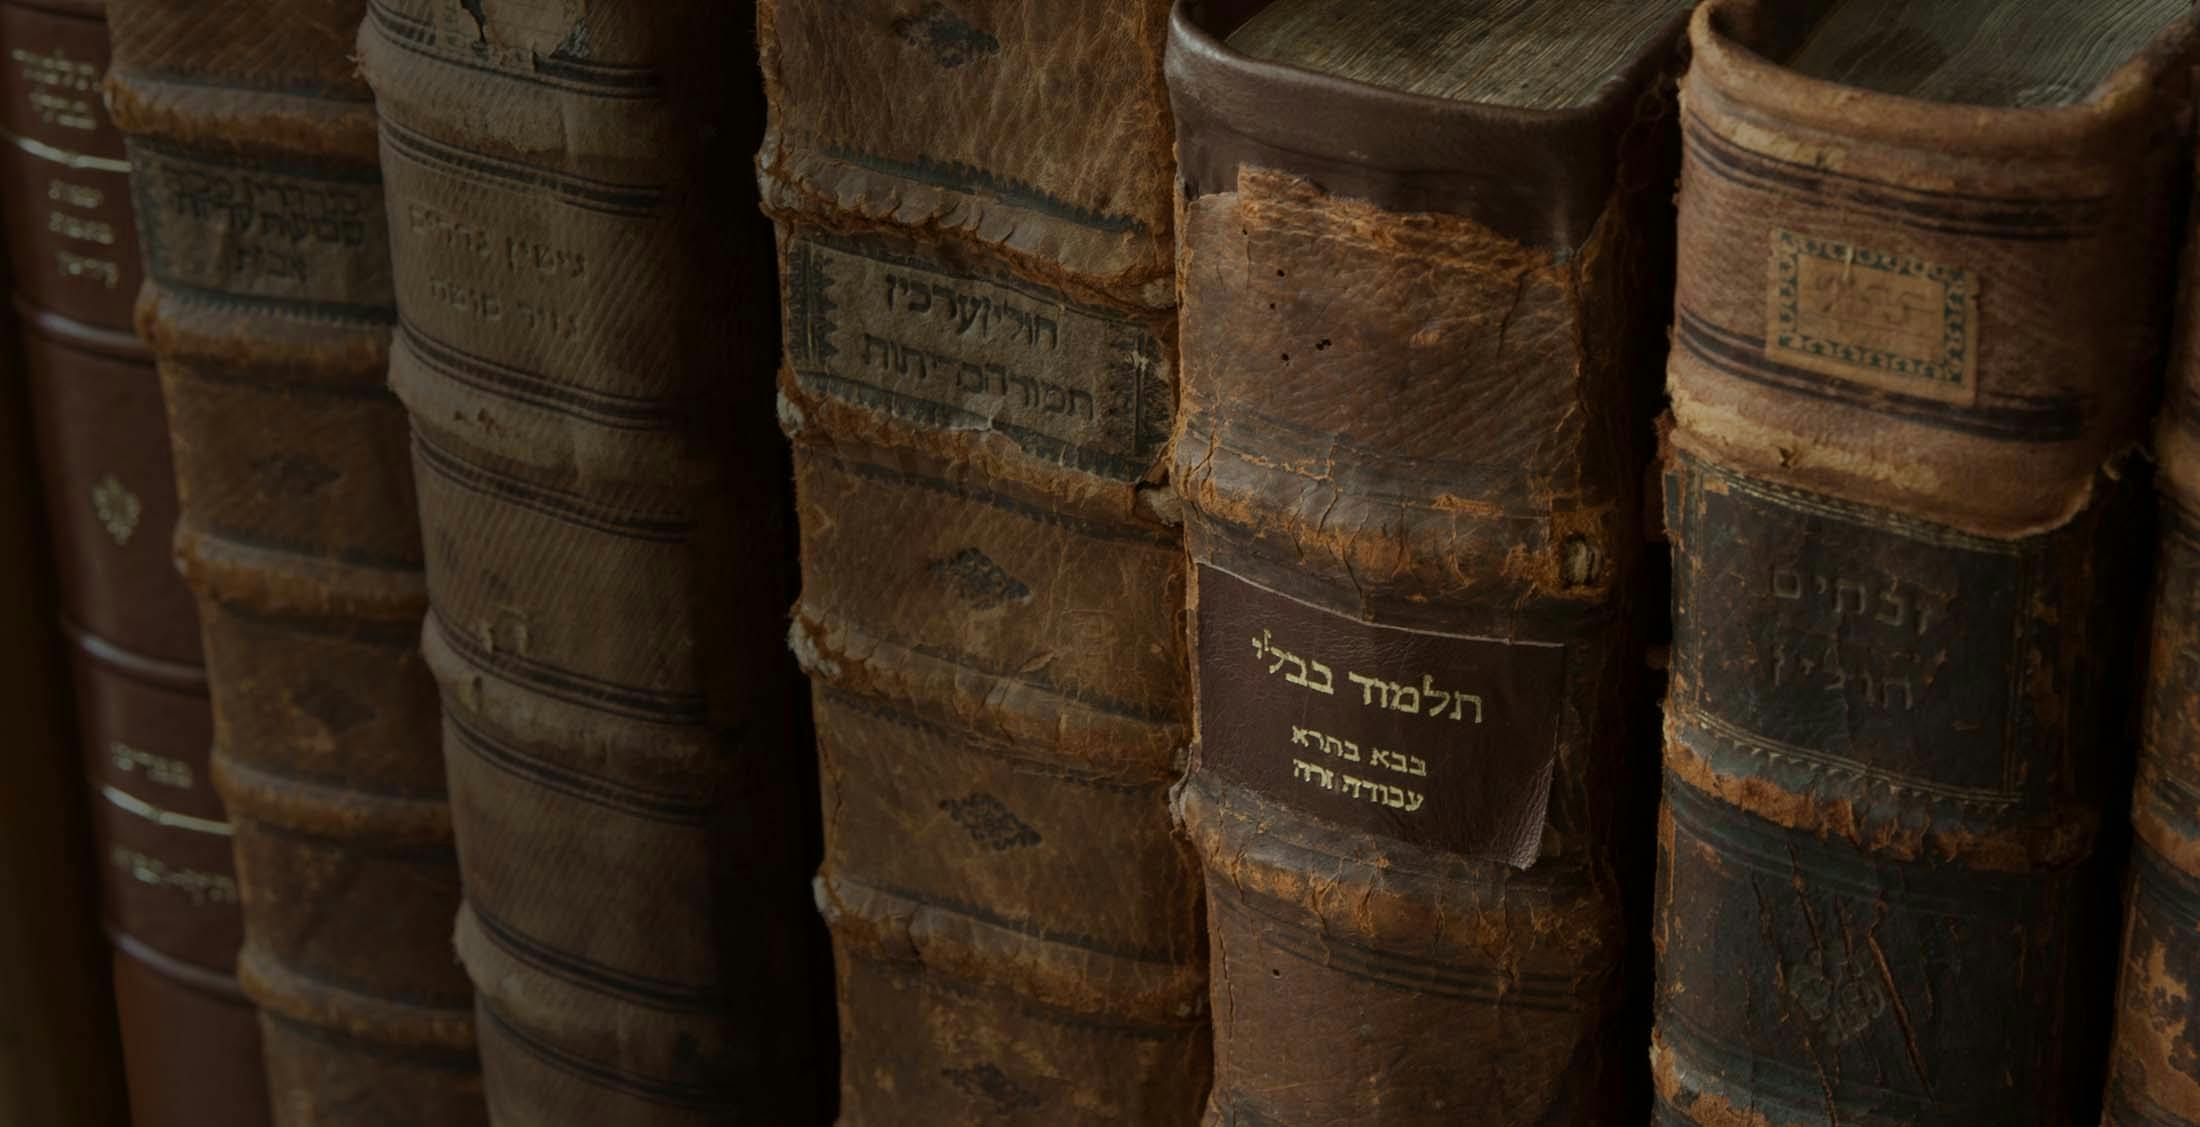 An old copy of the Talmud on a shelf with other Jewish books